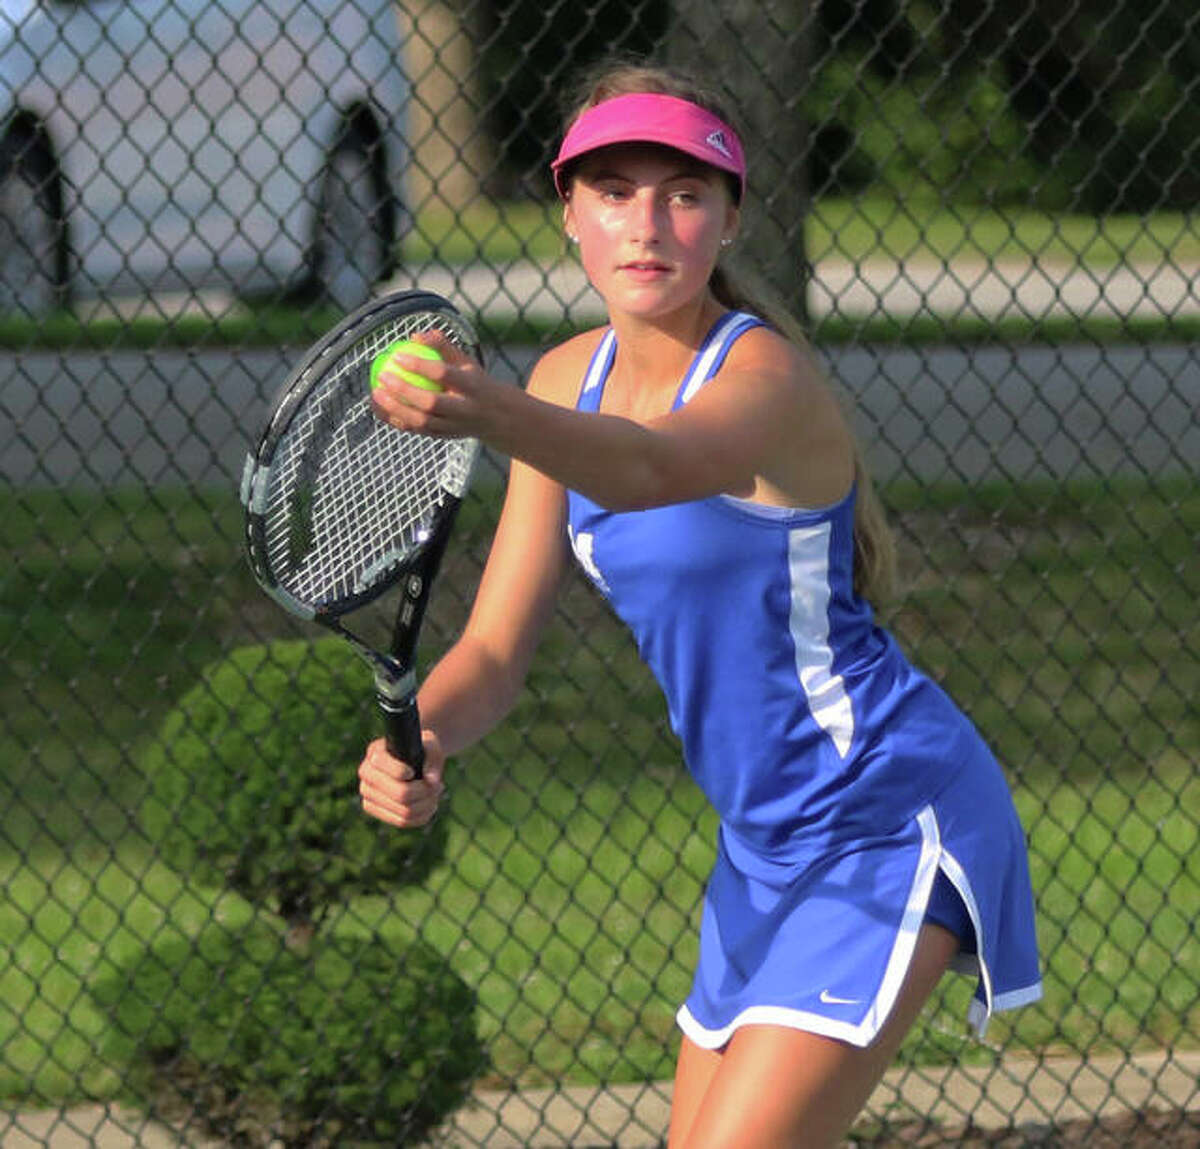 Marquette’s Monica Wendle advanced to the fifth round in the consolation bracket of the IHSA Girls State Tennis tournament, but then fell to Oak Park Fenwick’s Kate Trifilio 6-3, 6-0 Friday in suburban Chicago.